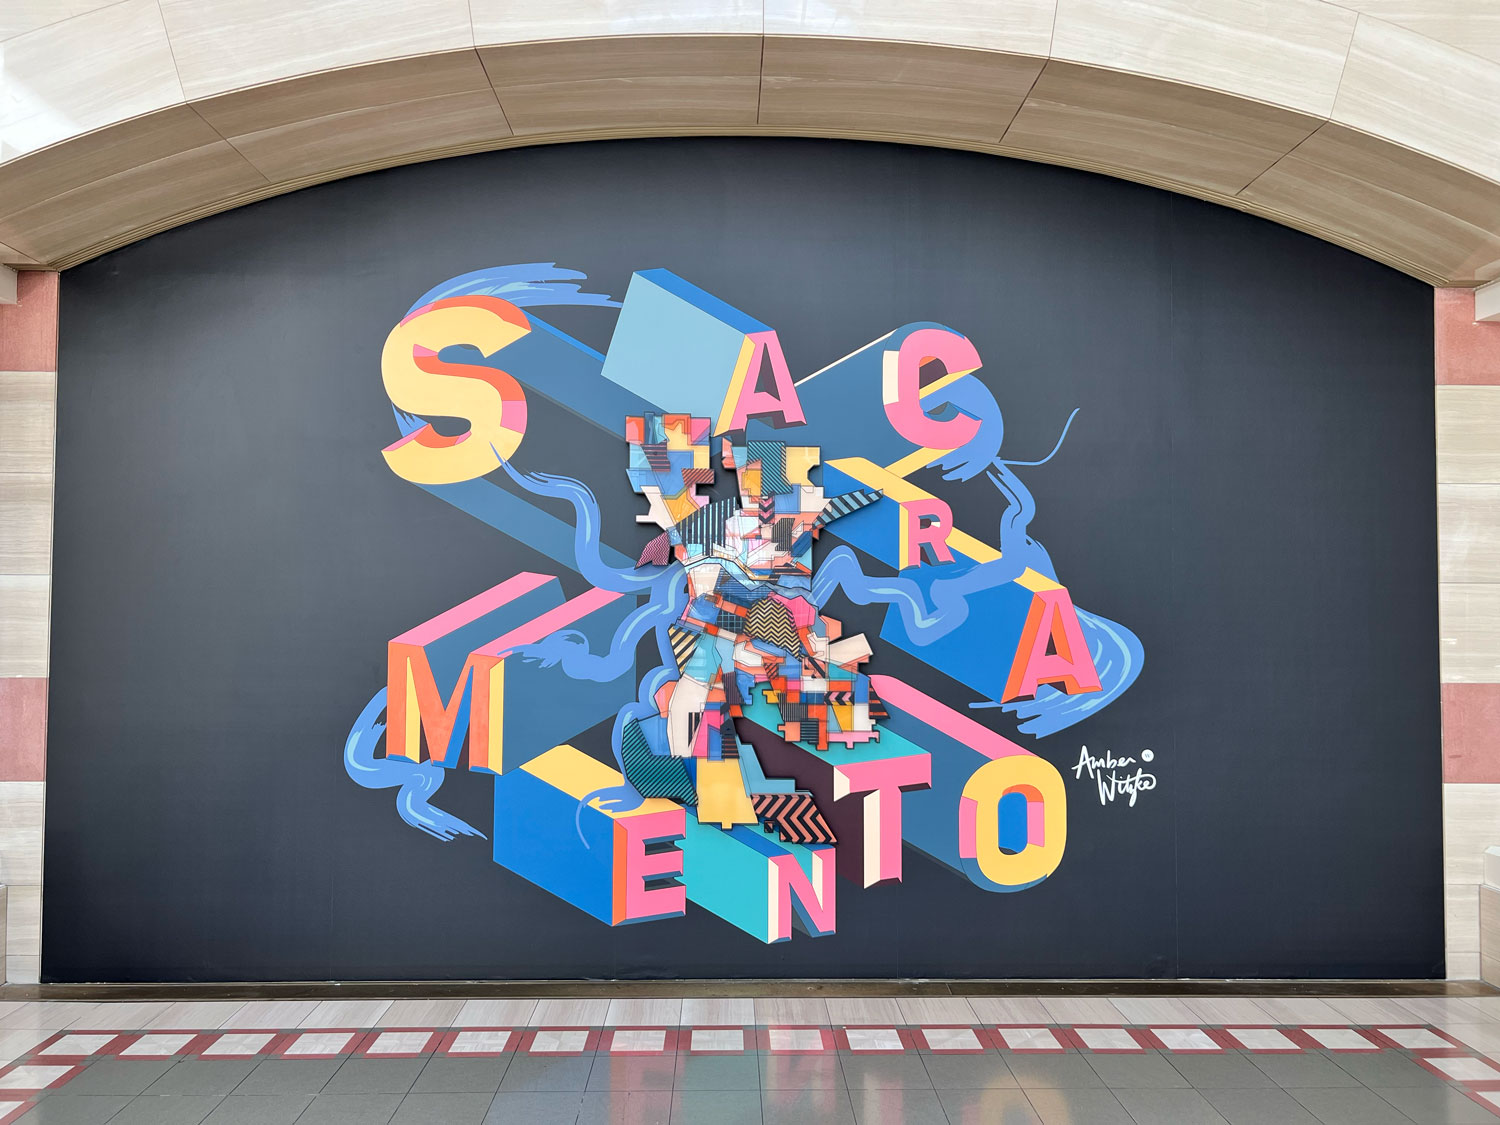 Vibrant Vistas: A Multidimensional Journey Exploring the Treasures of Sacramento, Mixed Media Mural by Amber Witzke. Commissioned by Arden Fair